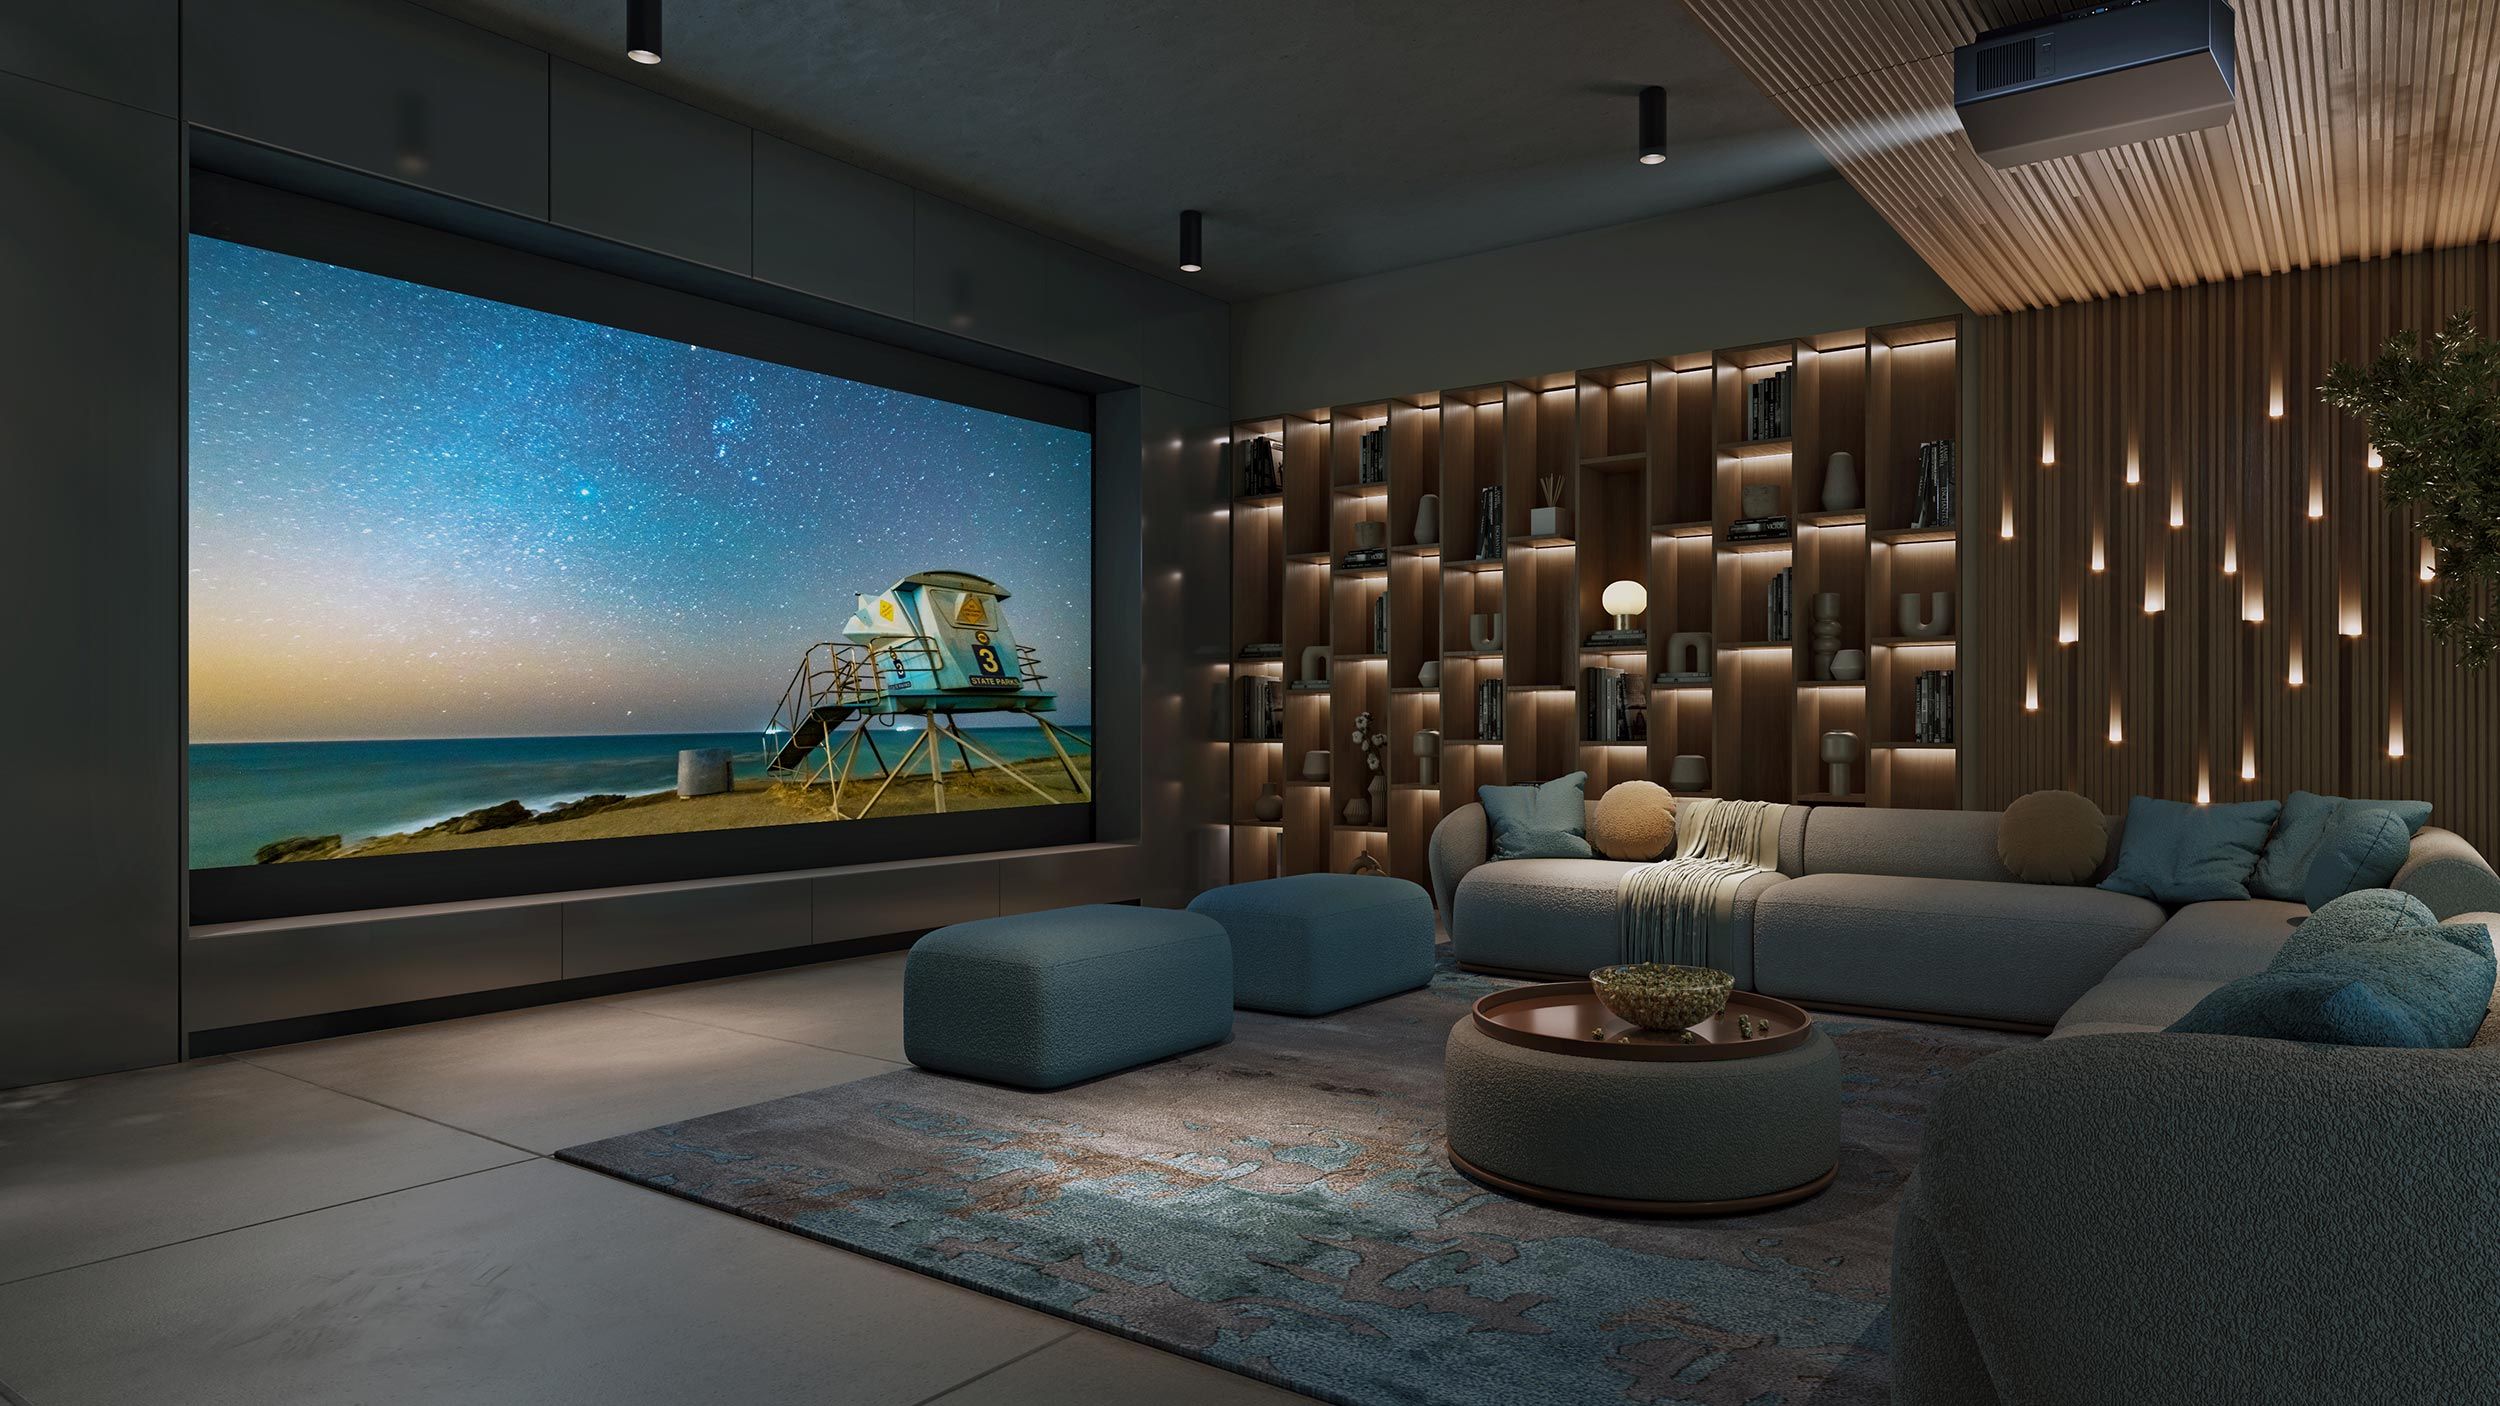 Luxurious Sony home theater with a large screen displaying a beach scene, cozy seating, ambient lighting, and wooden accents.